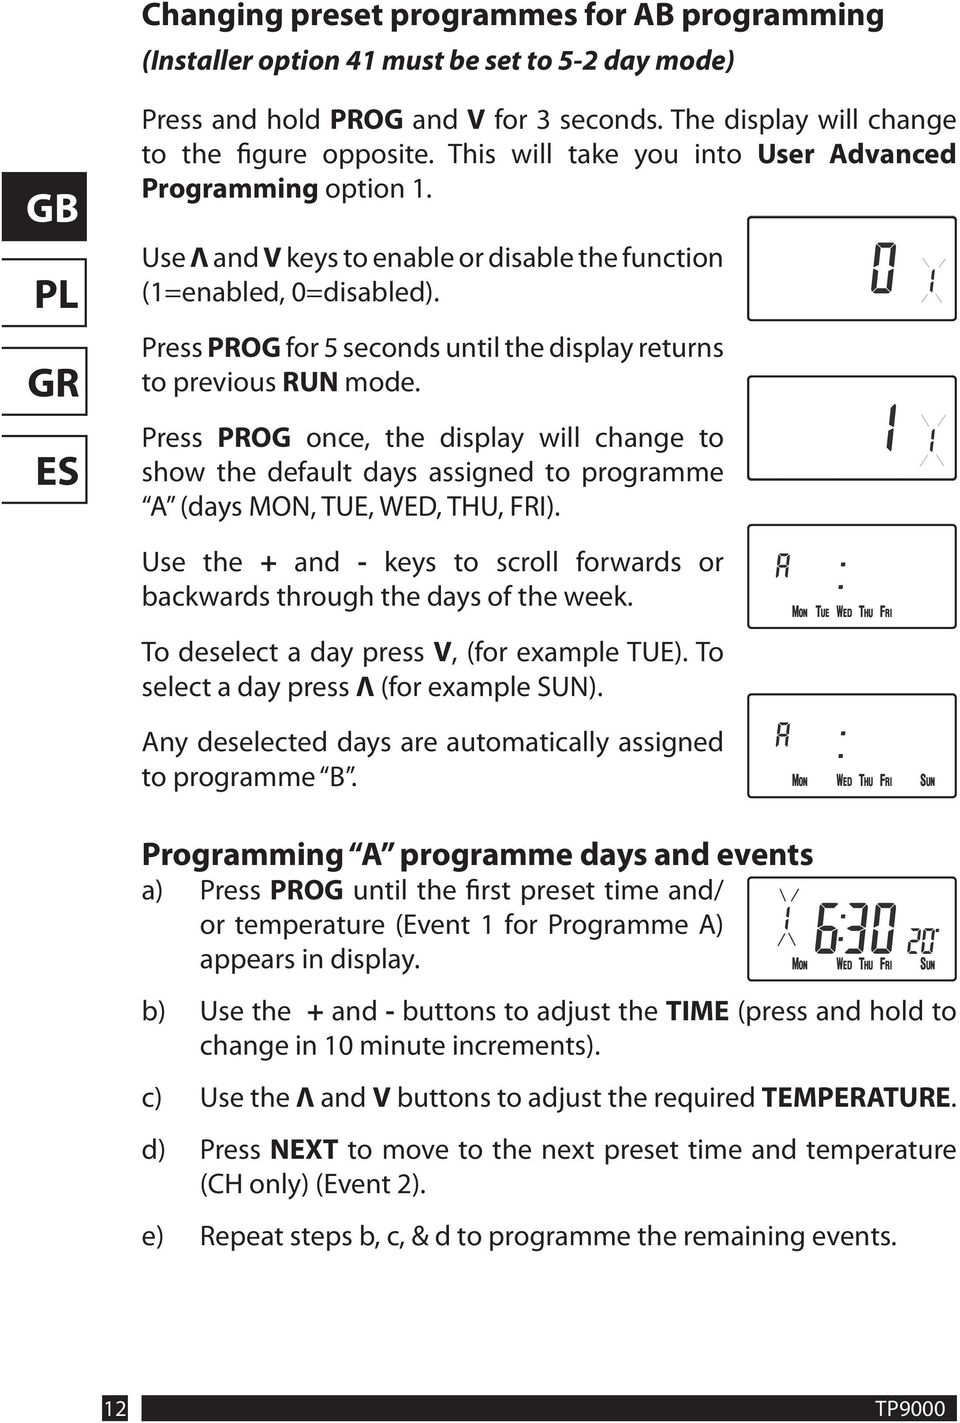 Press PROG for 5 seconds until the display returns to previous RUN mode. Press PROG once, the display will change to show the default days assigned to programme A (days MON, TUE, WED, THU, FRI).